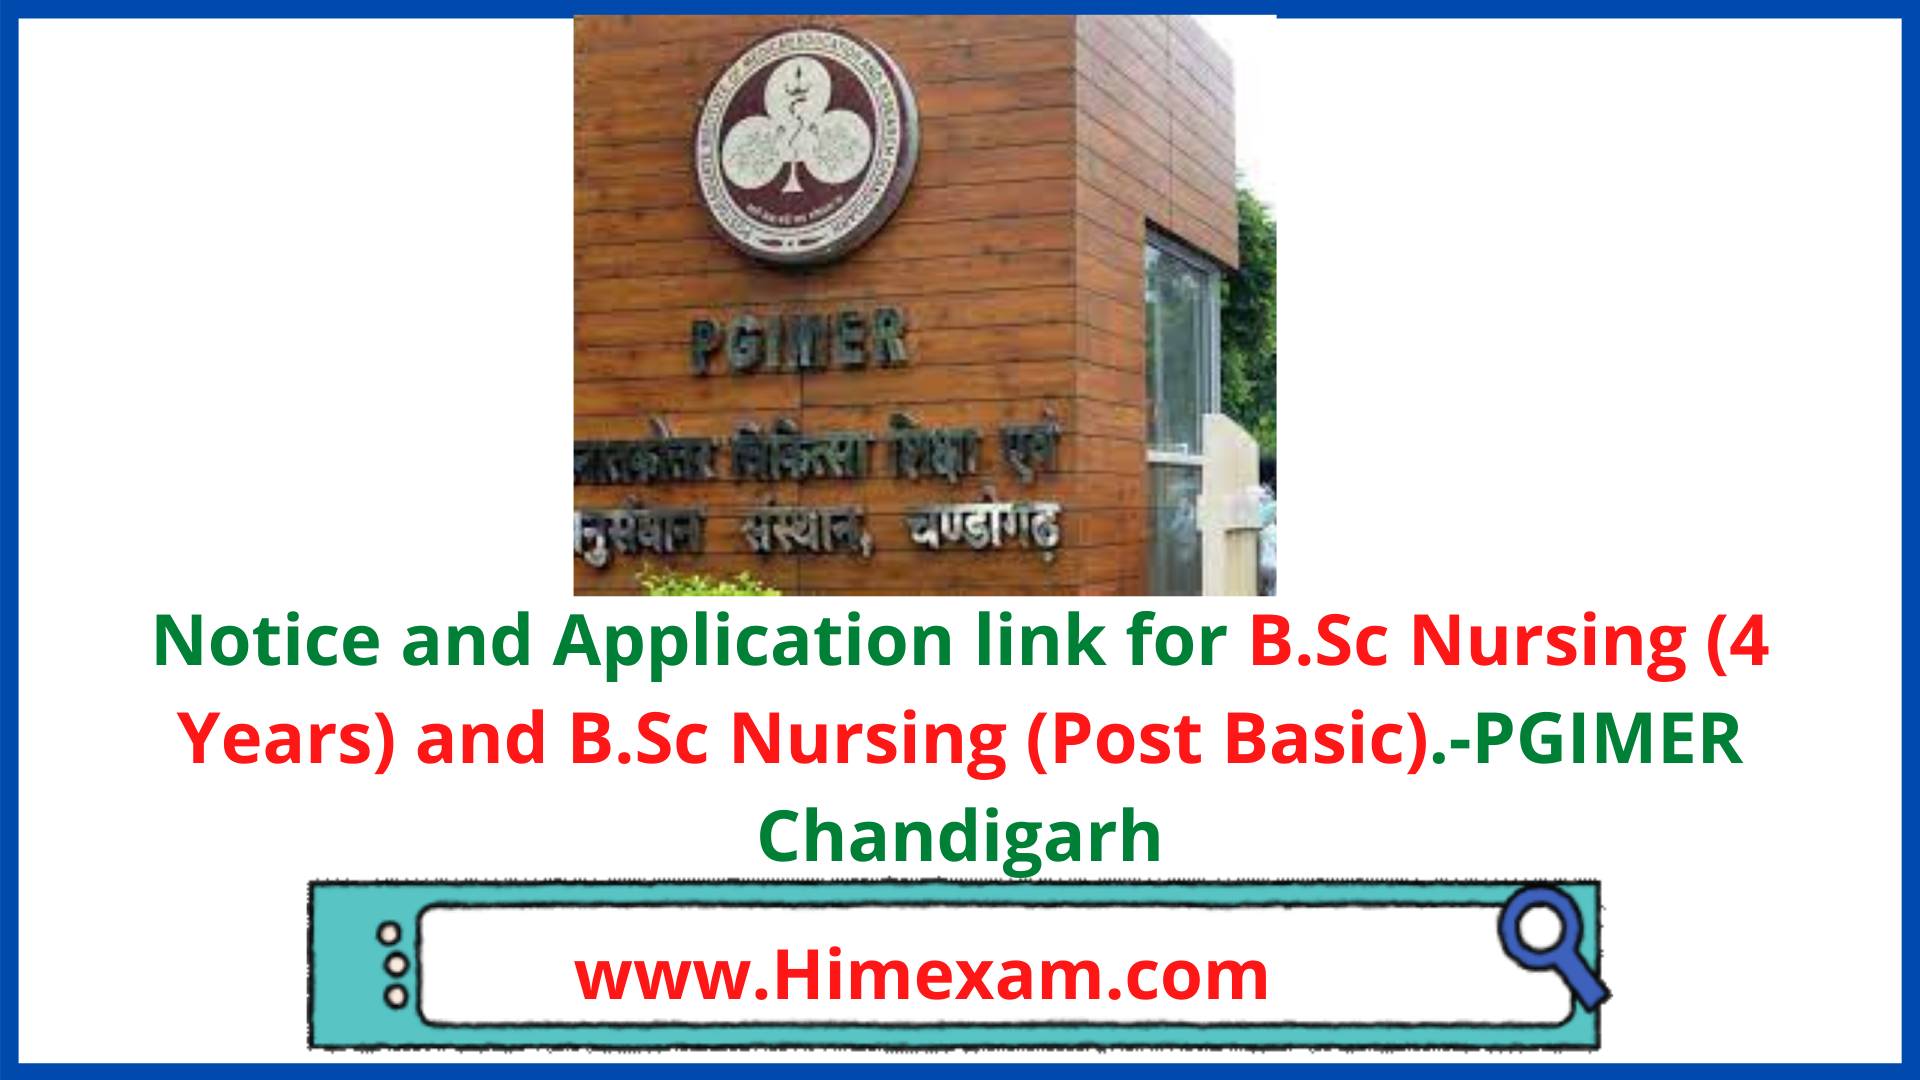 Notice and Application link for B.Sc Nursing (4 Years) and B.Sc Nursing (Post Basic).-PGIMER Chandigarh